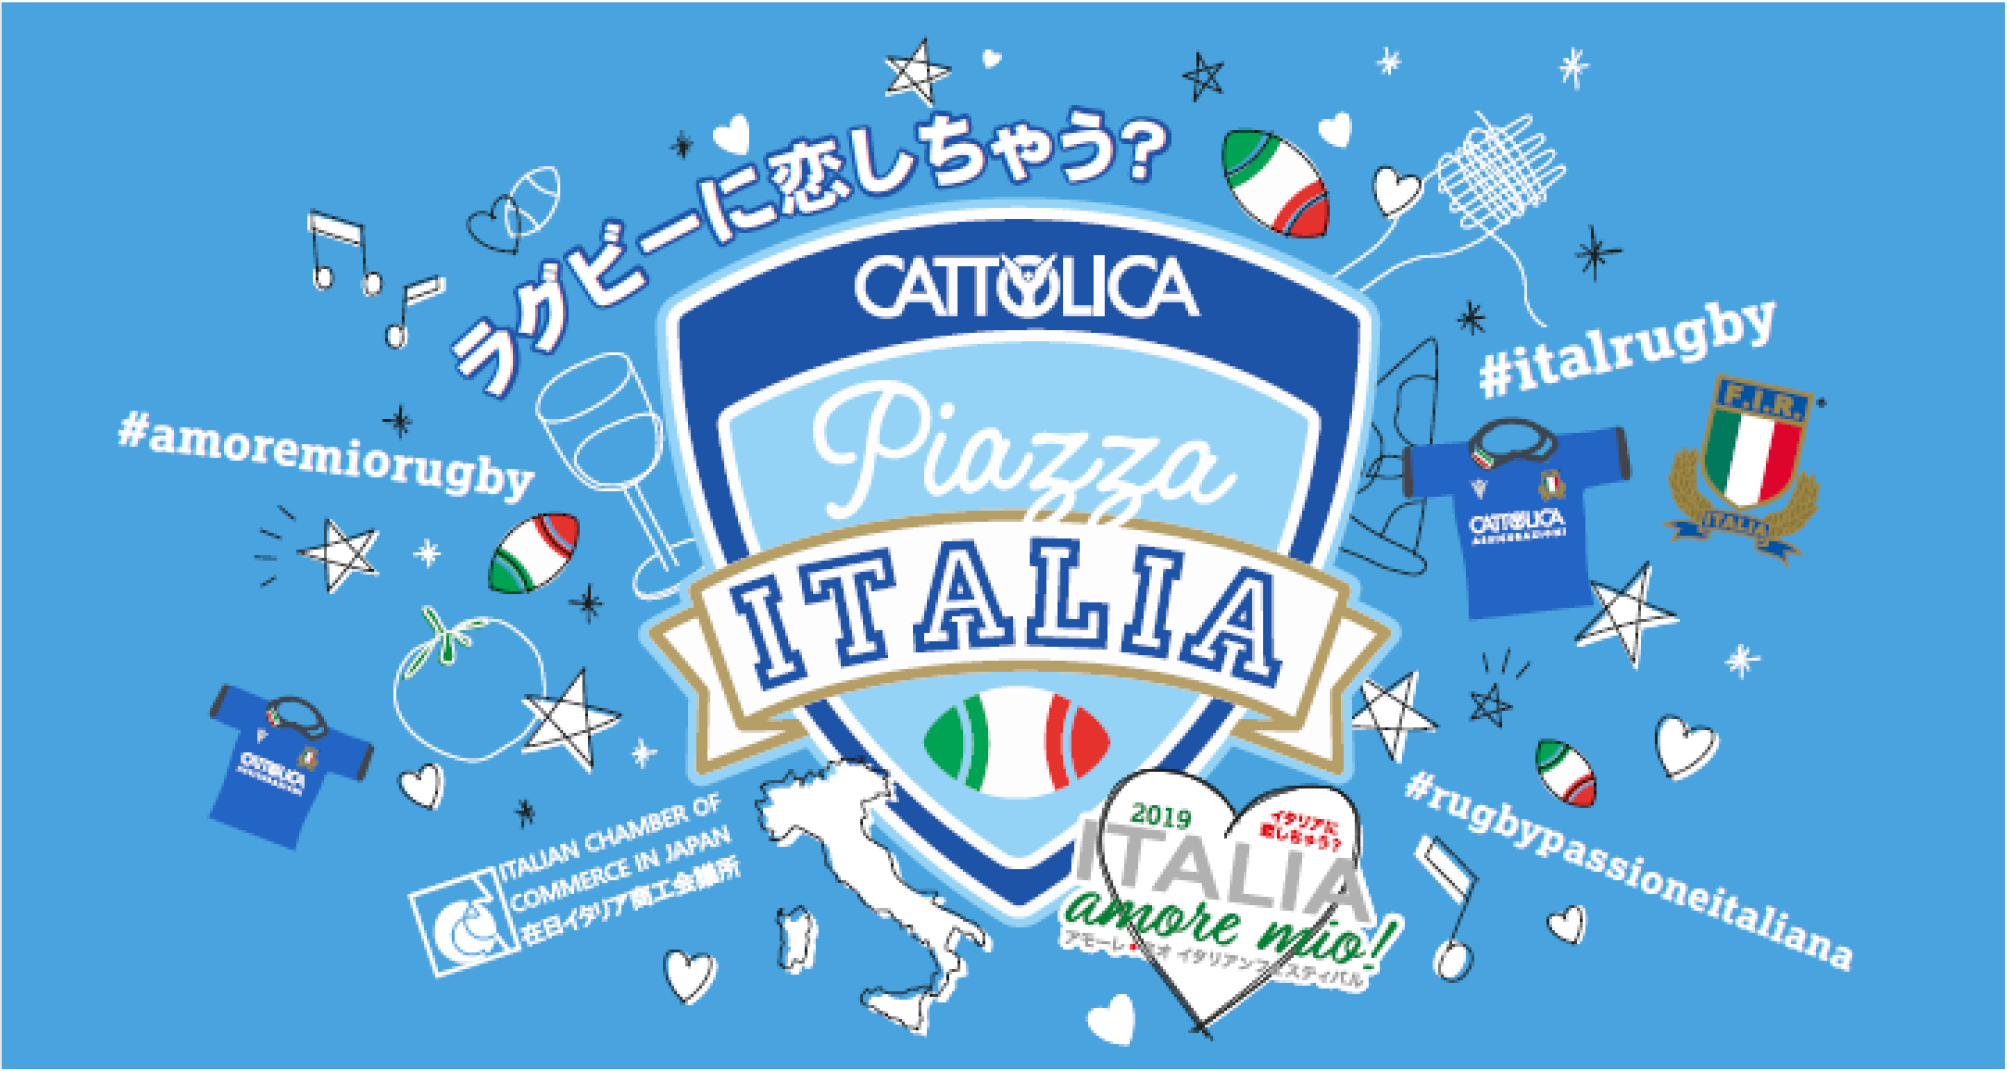 Cattolica Piazza Italia（カットーリカ ピアッツァ イタリア